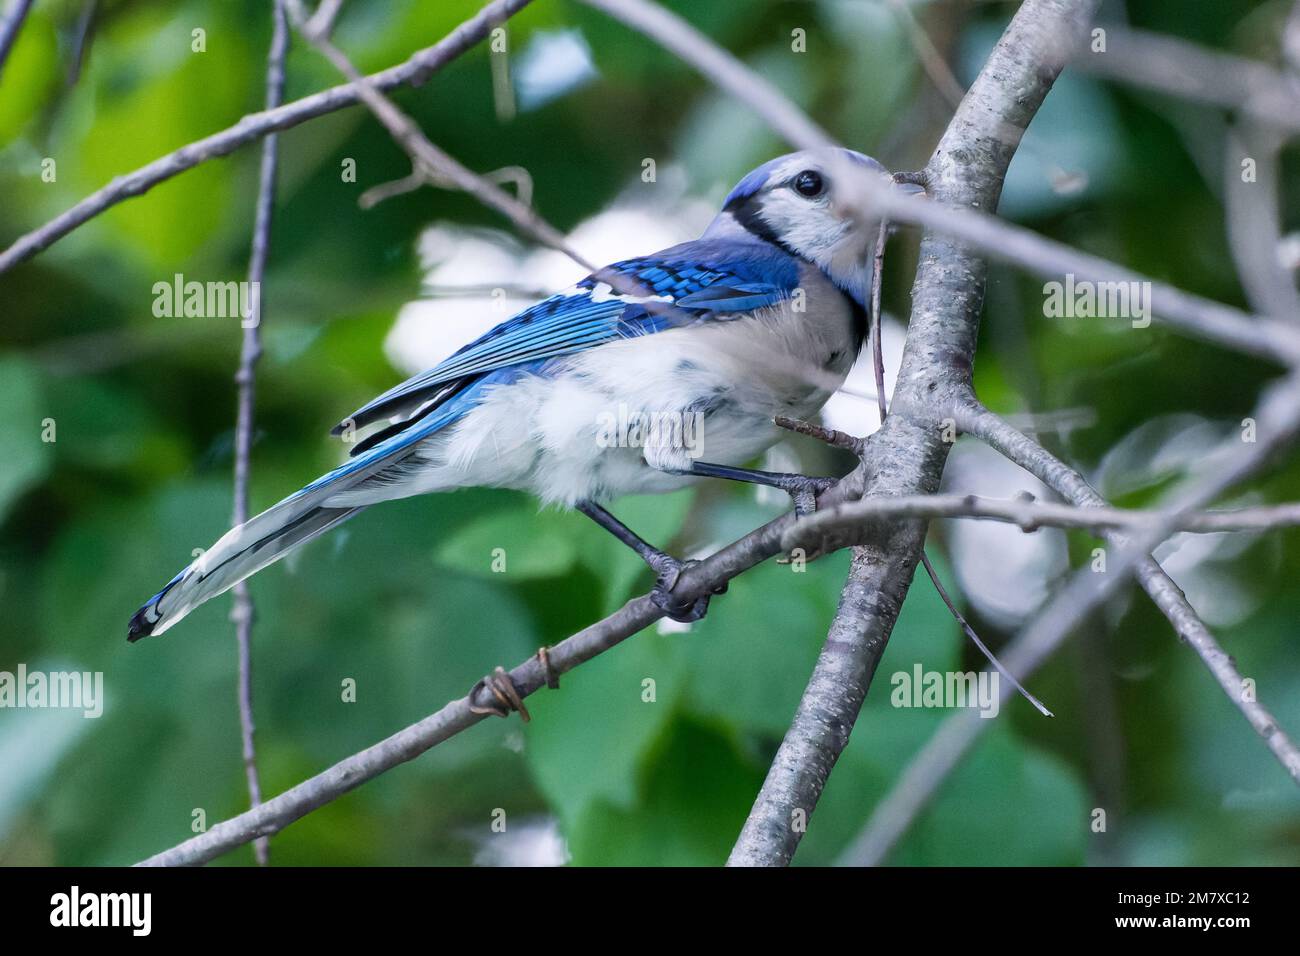 A close-up shot of a blue jay perched on a branch on a blurred background Stock Photo